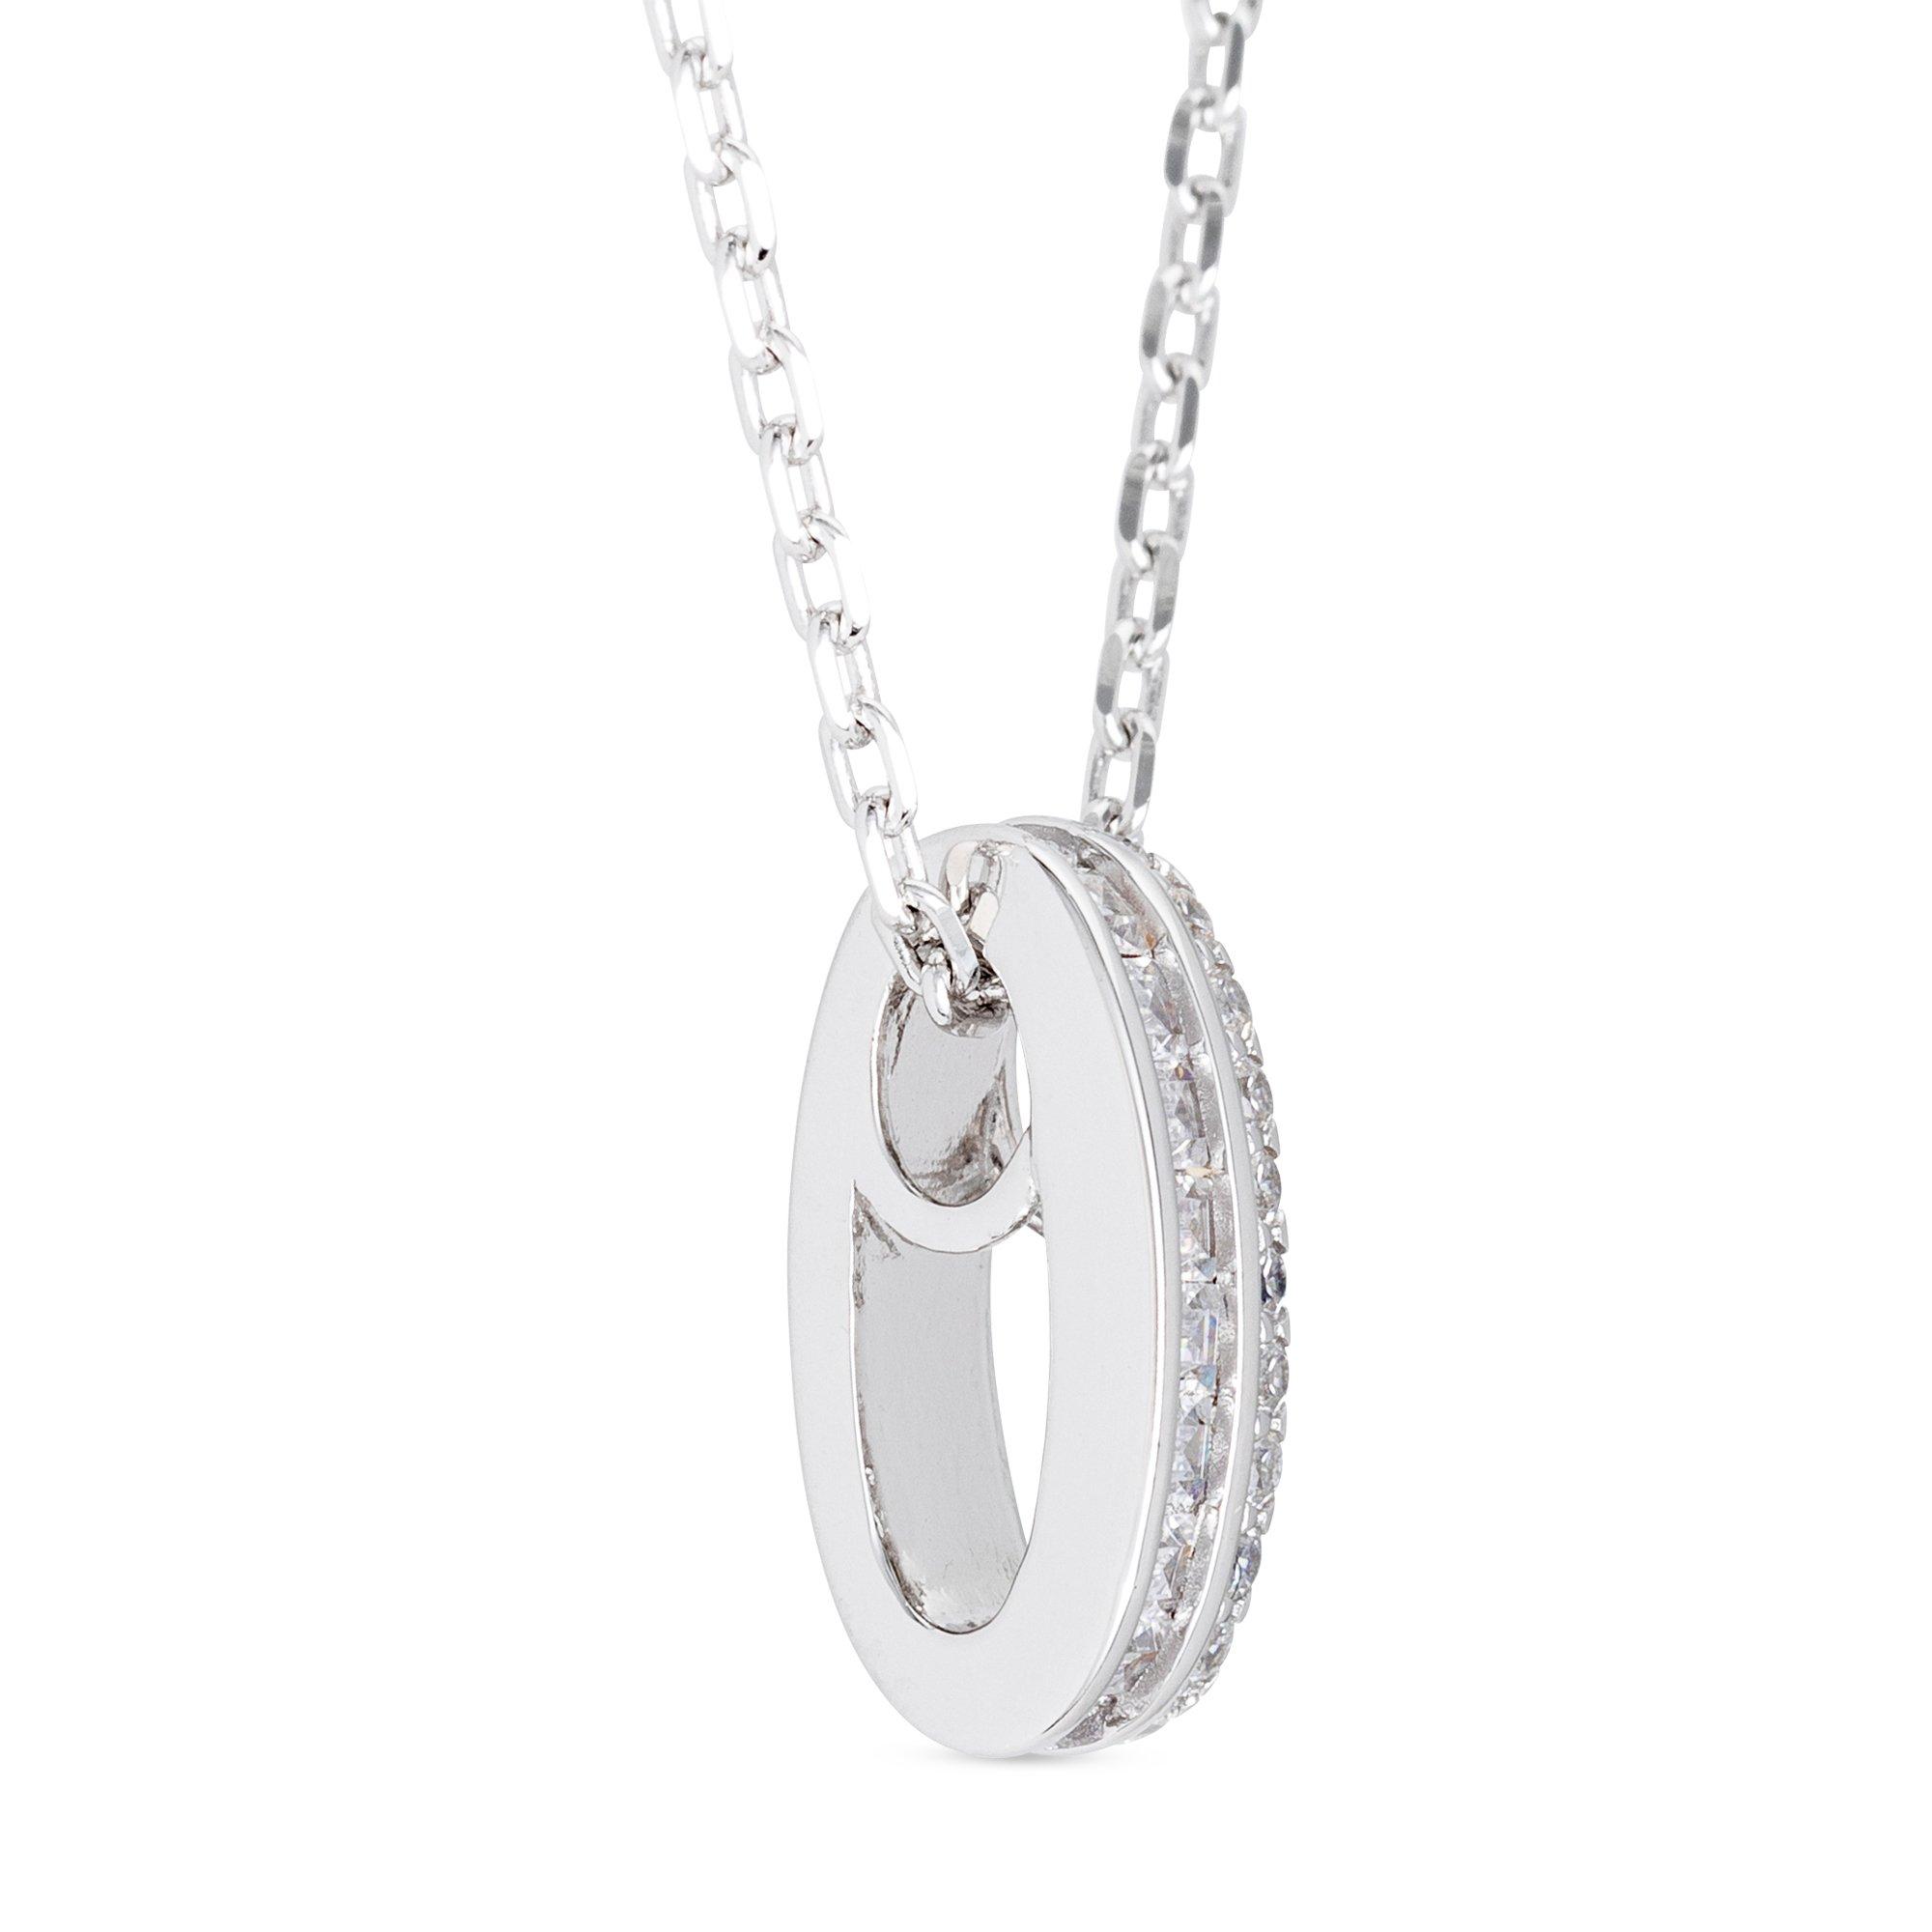 L'Atelier Sterling Silver 925  Collier 